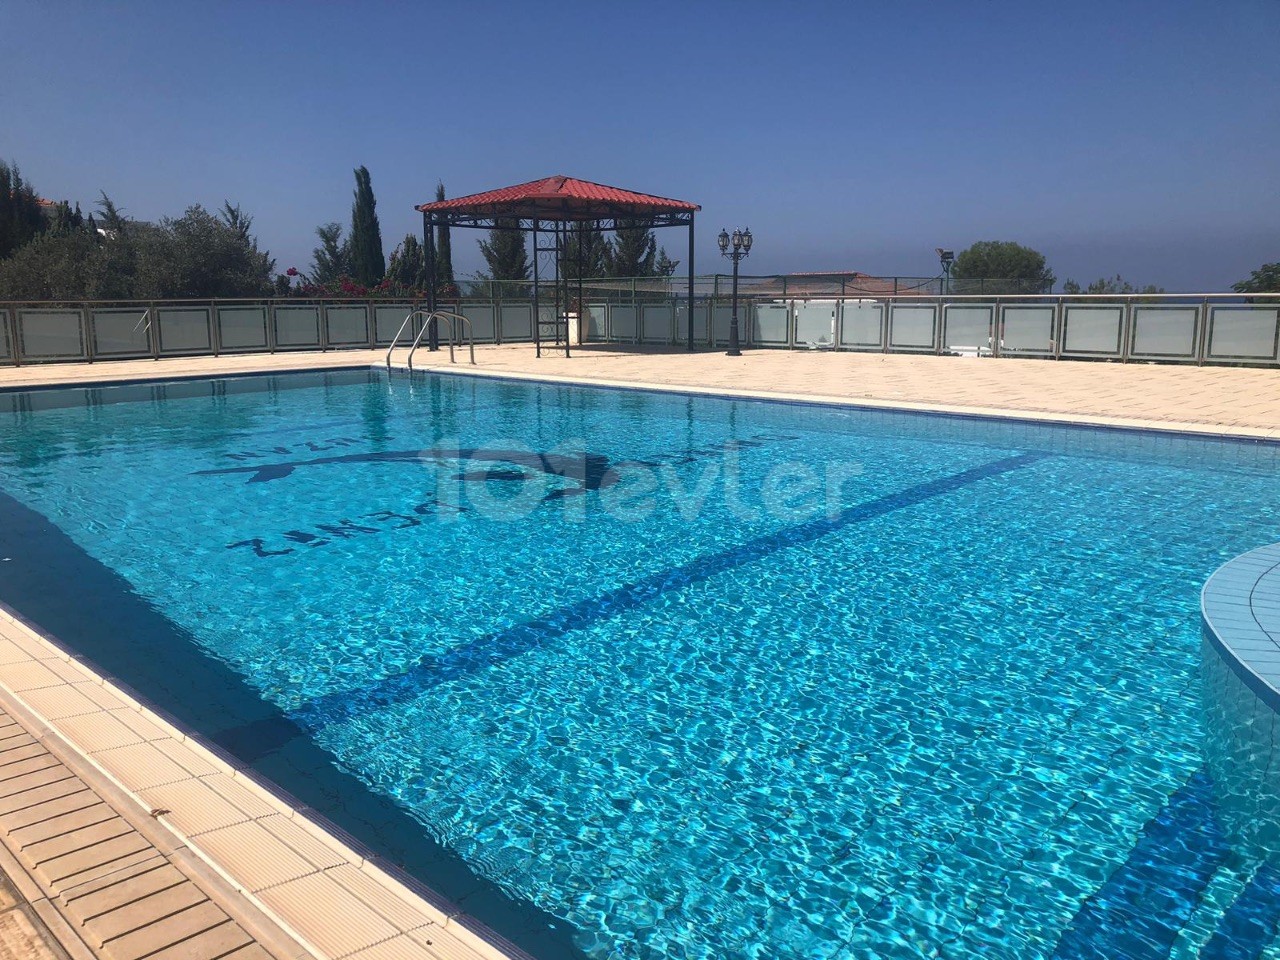 Mansion for Sale in Kyrenia/Edremit, within 3 acres of 3 houses